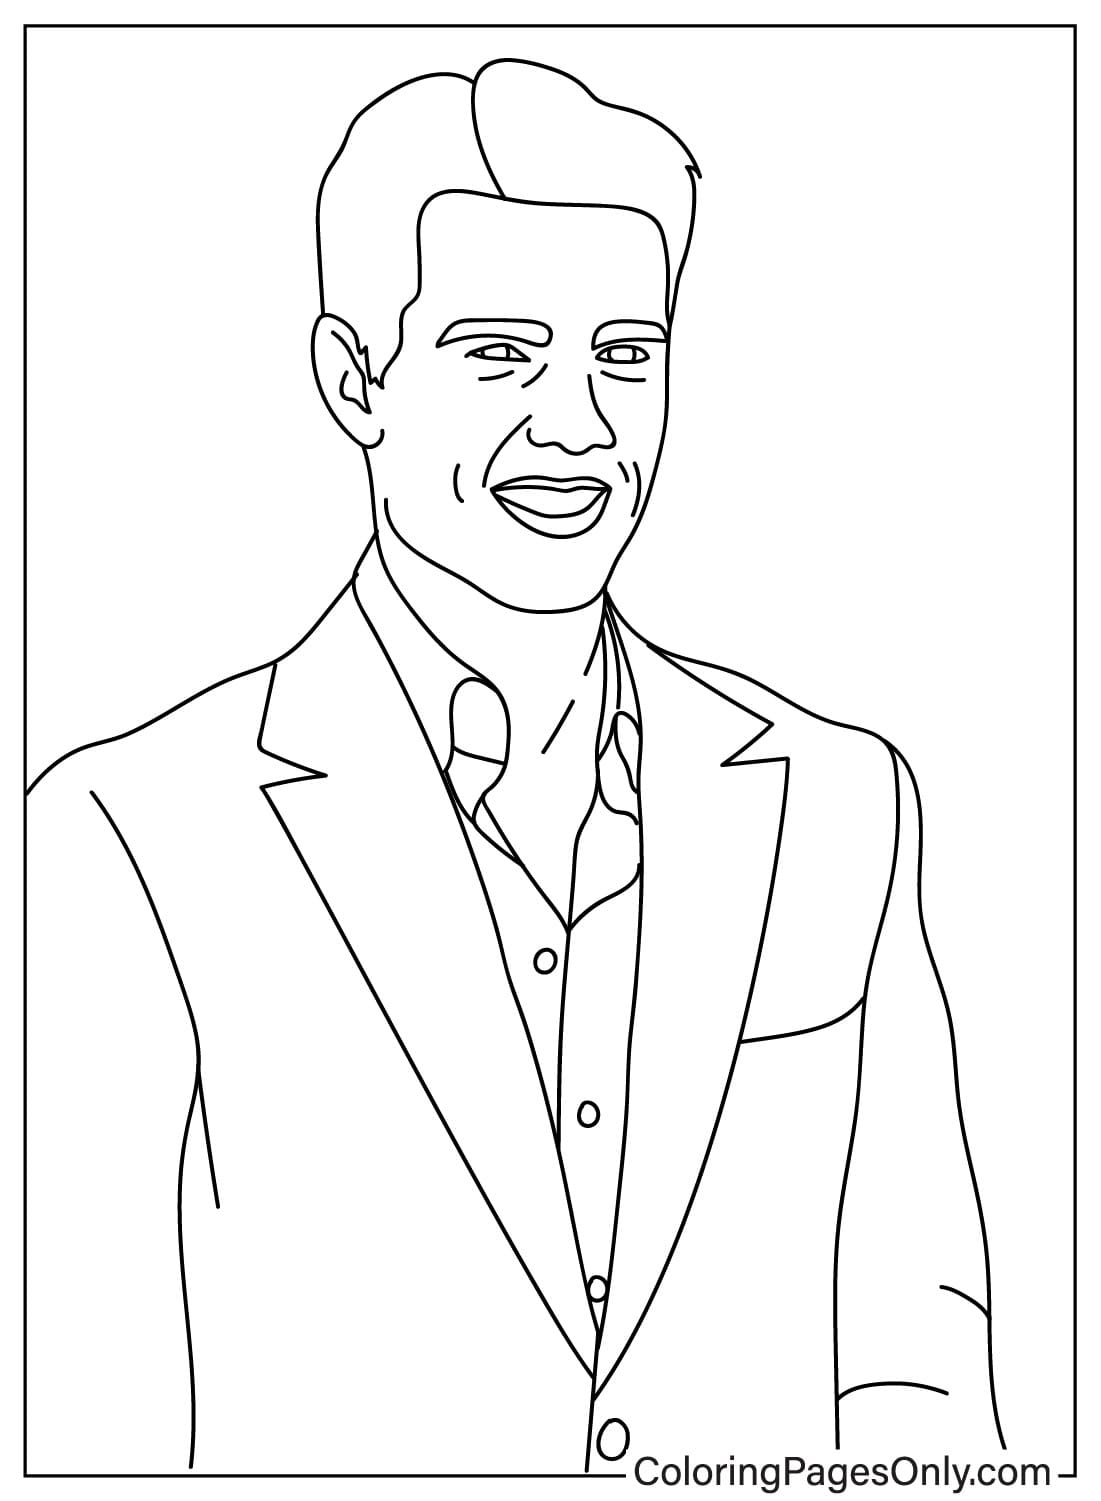 Tom Cruise Free Coloring Page from Tom Cruise